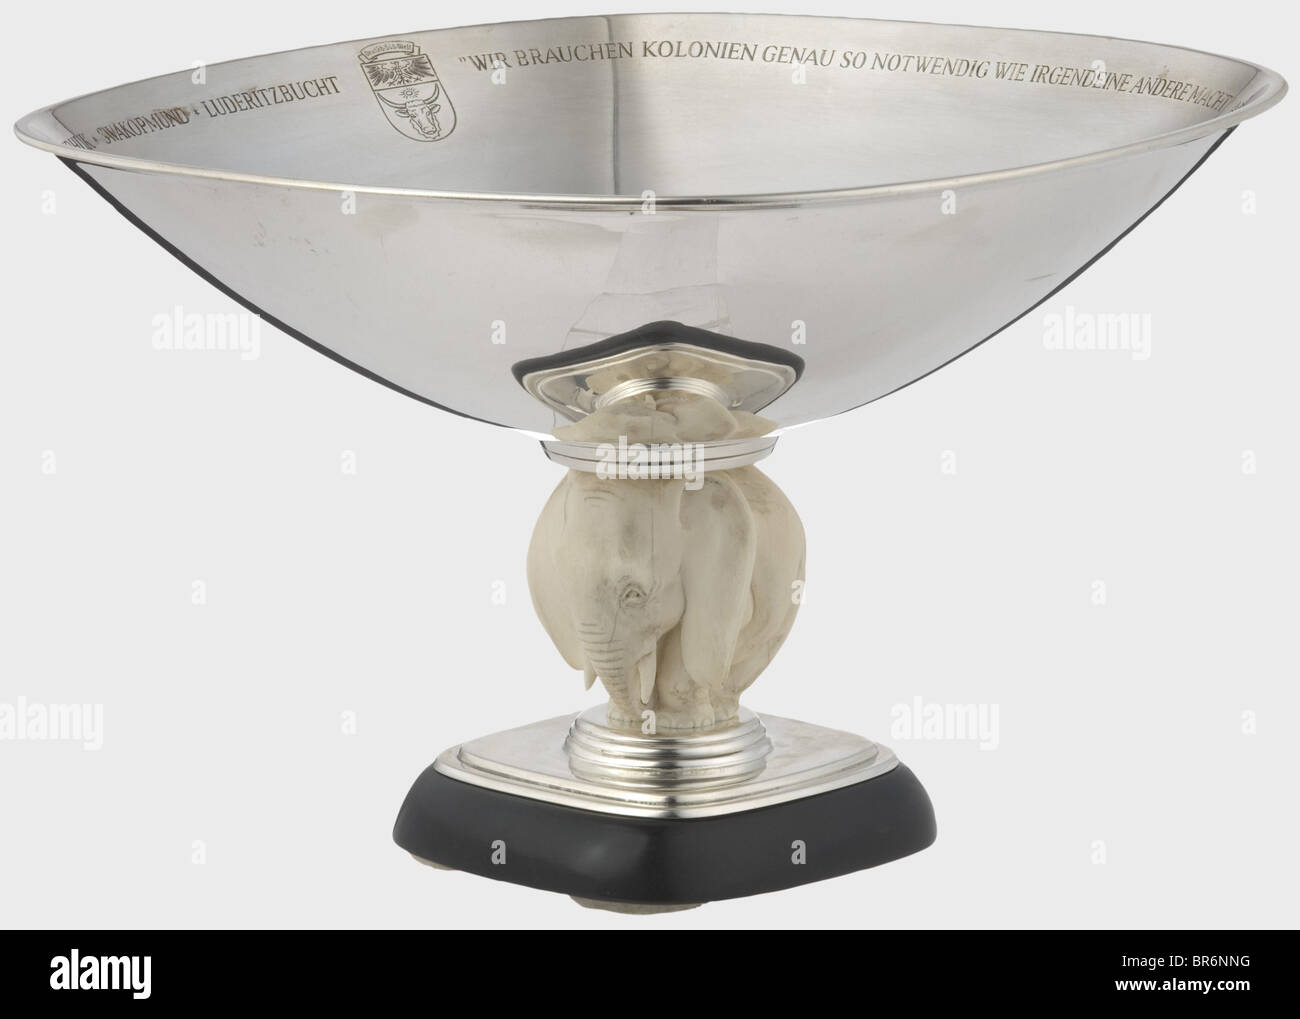 Adolf Hitler - a silver bowl for his 50th birthday on 20th April 1939, a present from the German Boy Scouts of South West Africa., Elegant bowl resting on the back of a three-dimensionally carved African elephant mounted on an ebony socle with silver plinth, the latter with hallmark '925', crescent, crown and number '10022'. The interior of the bowl surrounded by the engraved quote and dedication 'We need colonies as much as any other power' - Adolf Hitler - from the German youth in South West, to its Führer Adolf Hitler for his 50th birthday * 20th April 1939 , Stock Photo